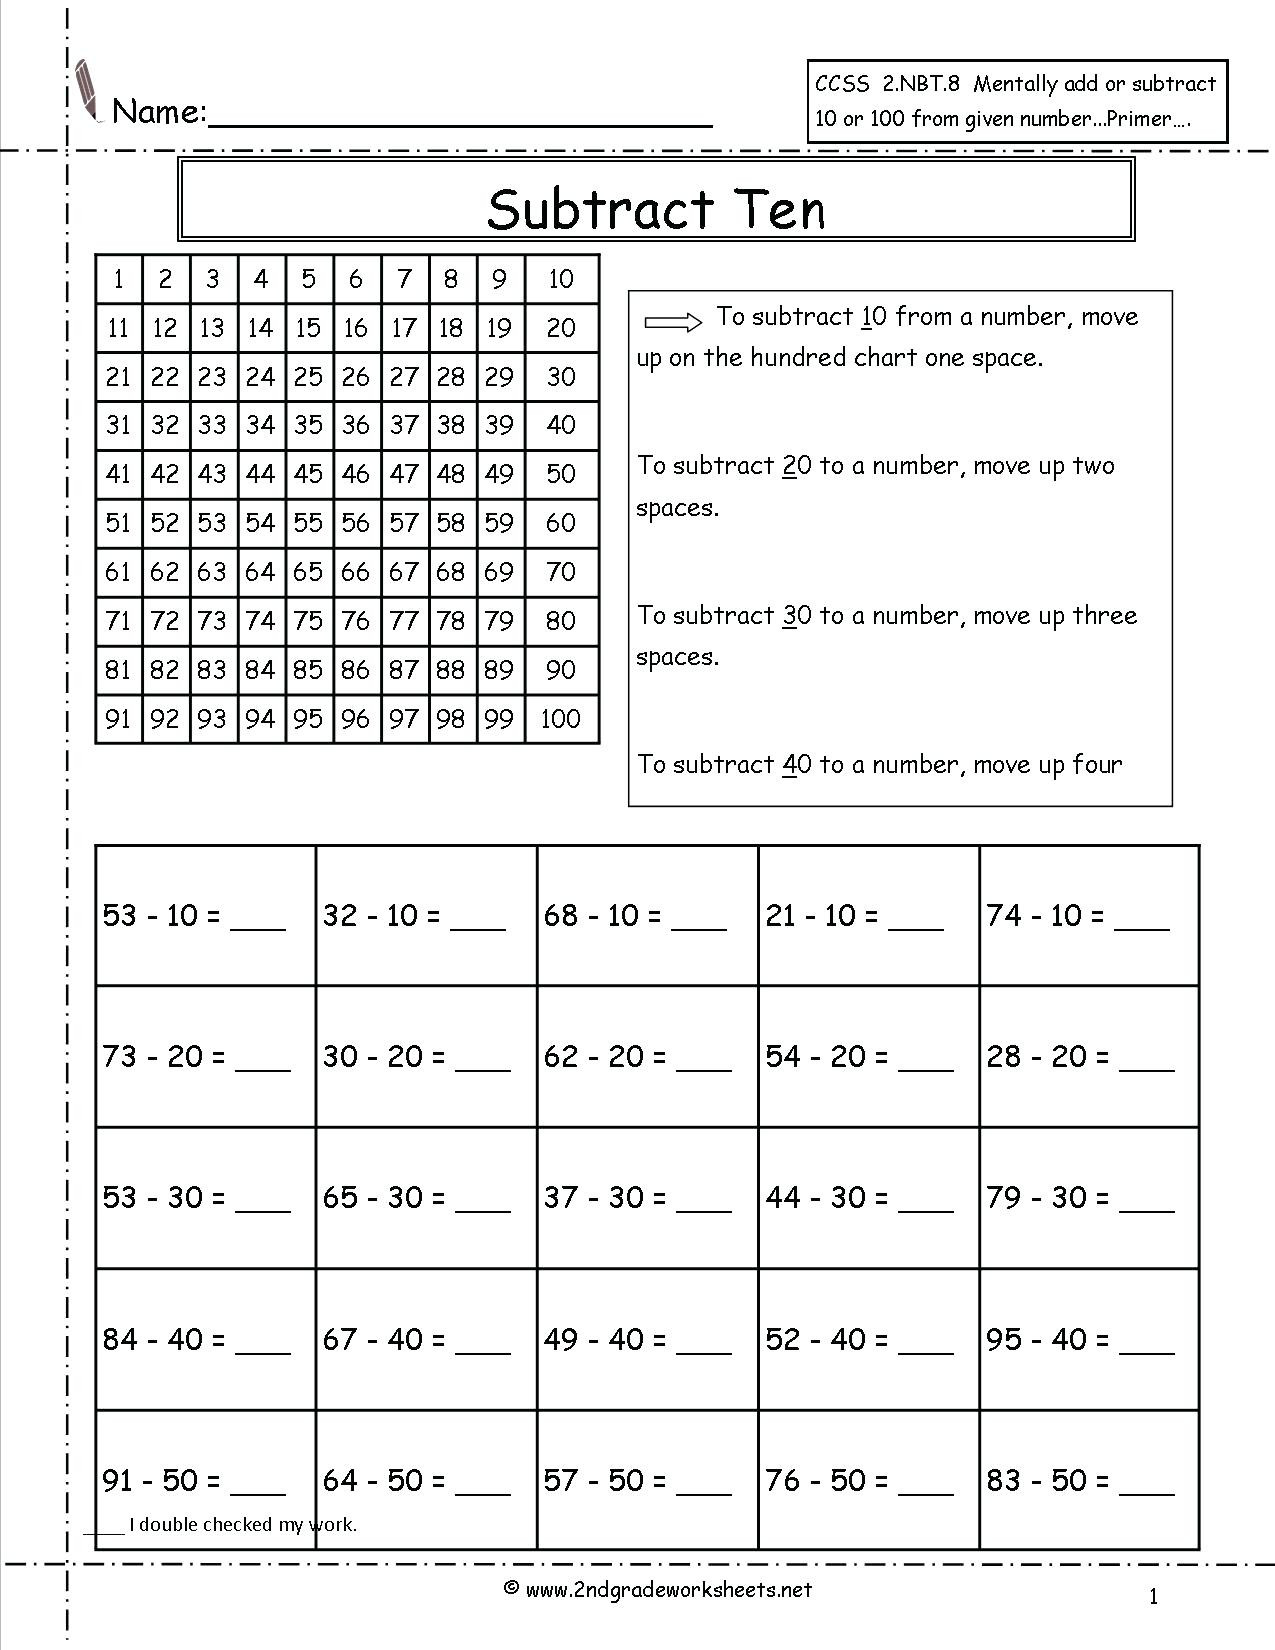 Regrouping Subtraction Worksheets 3rd Grade Subtraction with Regrouping Worksheets Free Two Digit